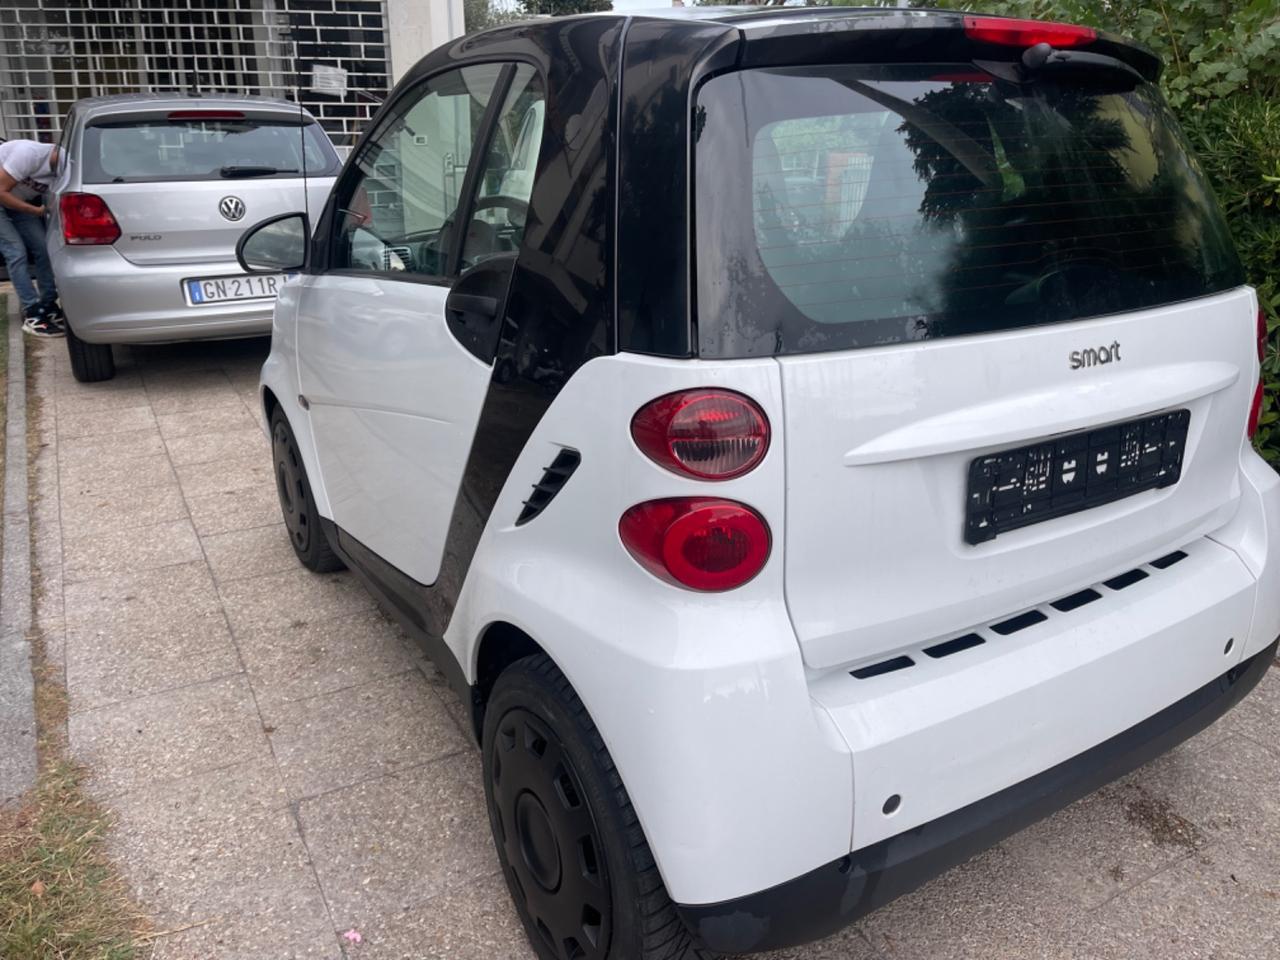 Smart ForTwo 800 33 kW coupé pure cdi